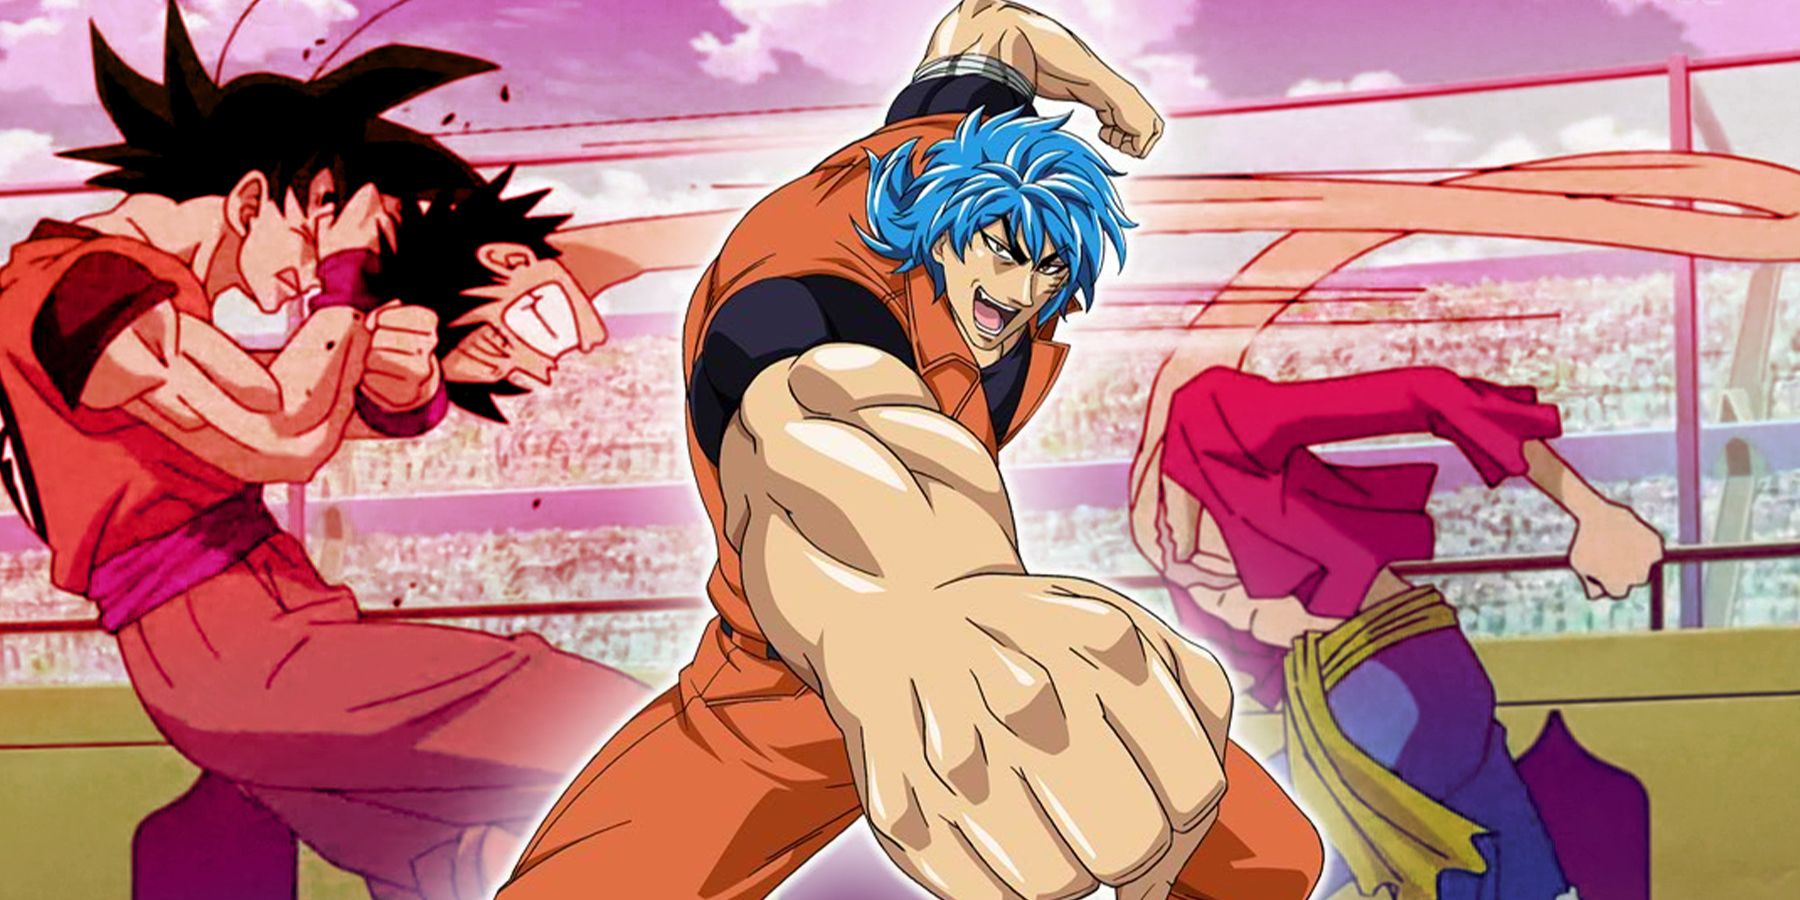 Dragon Ball X One Piece X Toriko Crossover: English Dub Preview RELEASE  DATE March 4, 2023 𝗙𝗼𝗹𝗹𝗼𝘄 @officialgogetaa 𝗳𝗼𝗿 𝗺𝗼𝗿𝗲  𝗰𝗼𝗻𝘁𝗲𝗻𝘁 𝗧𝘂𝗿𝗻…